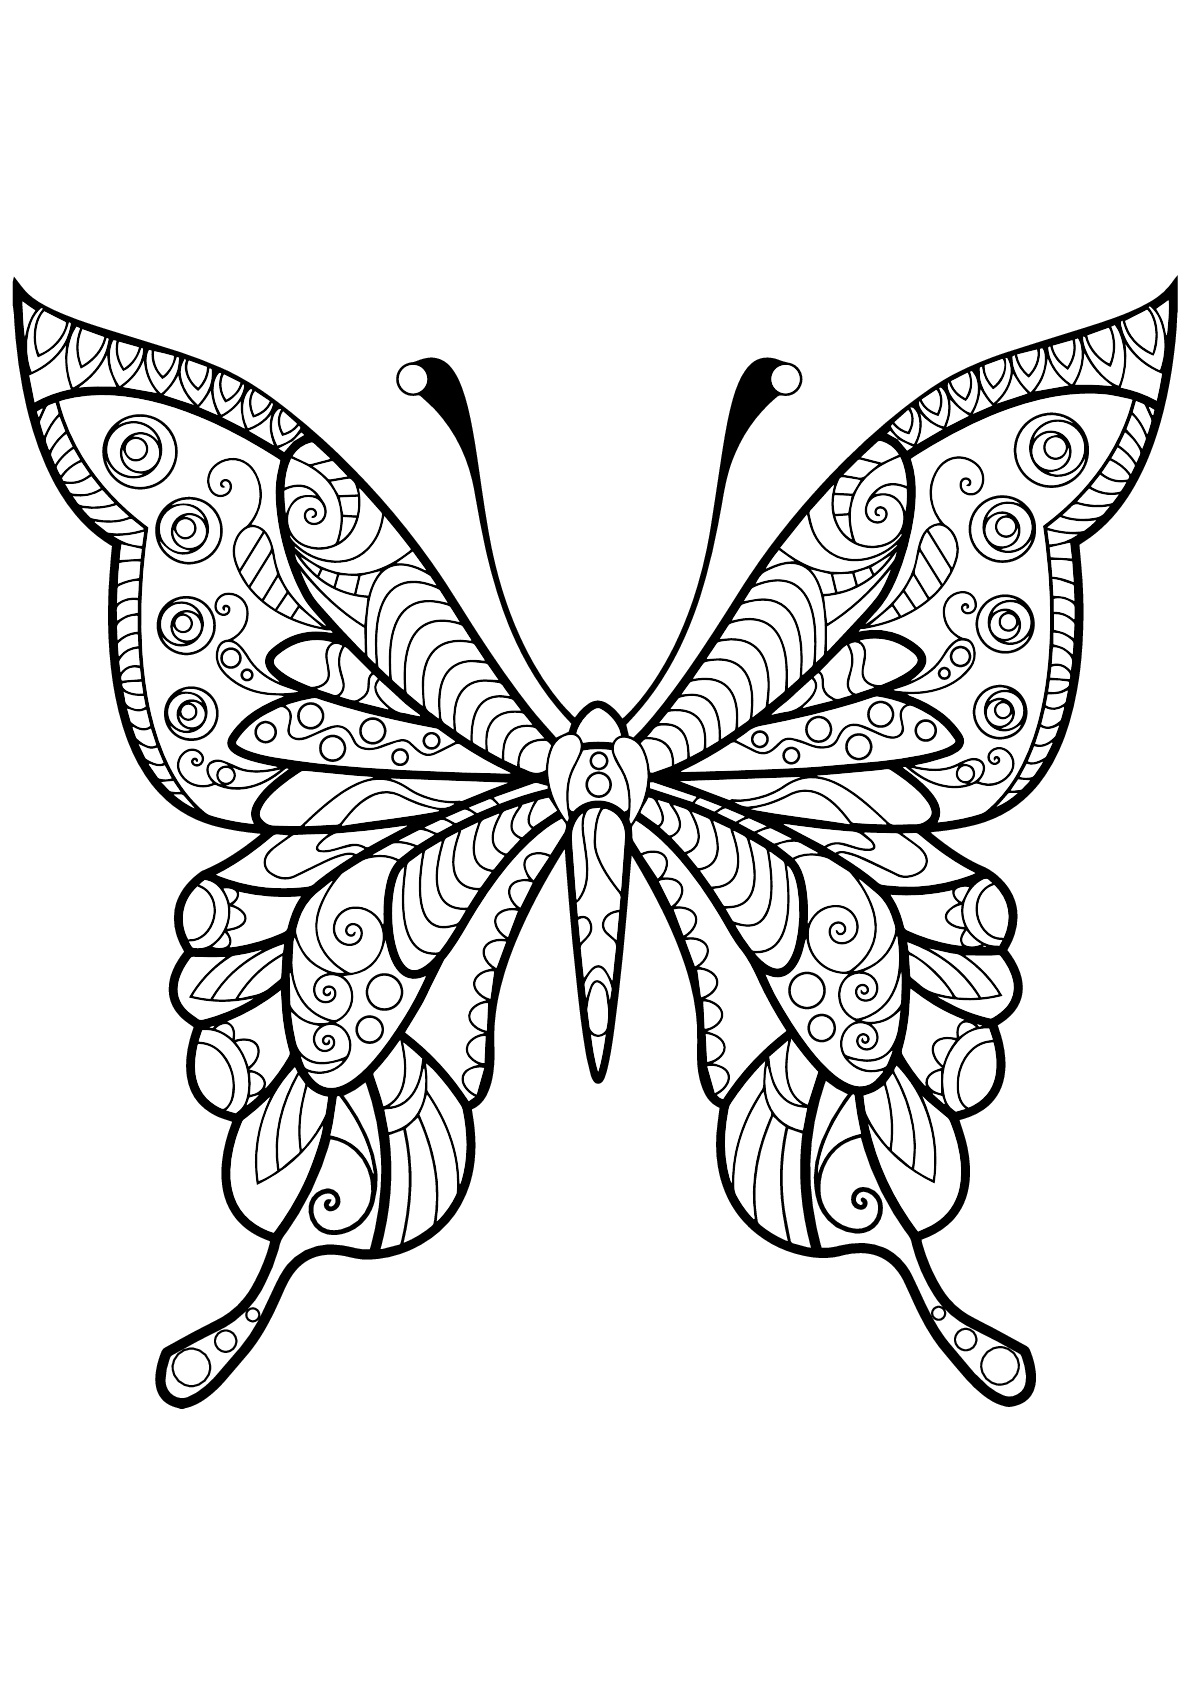 Butterfly beautiful patterns 4 - Butterflies &amp; insects Adult Coloring Pages